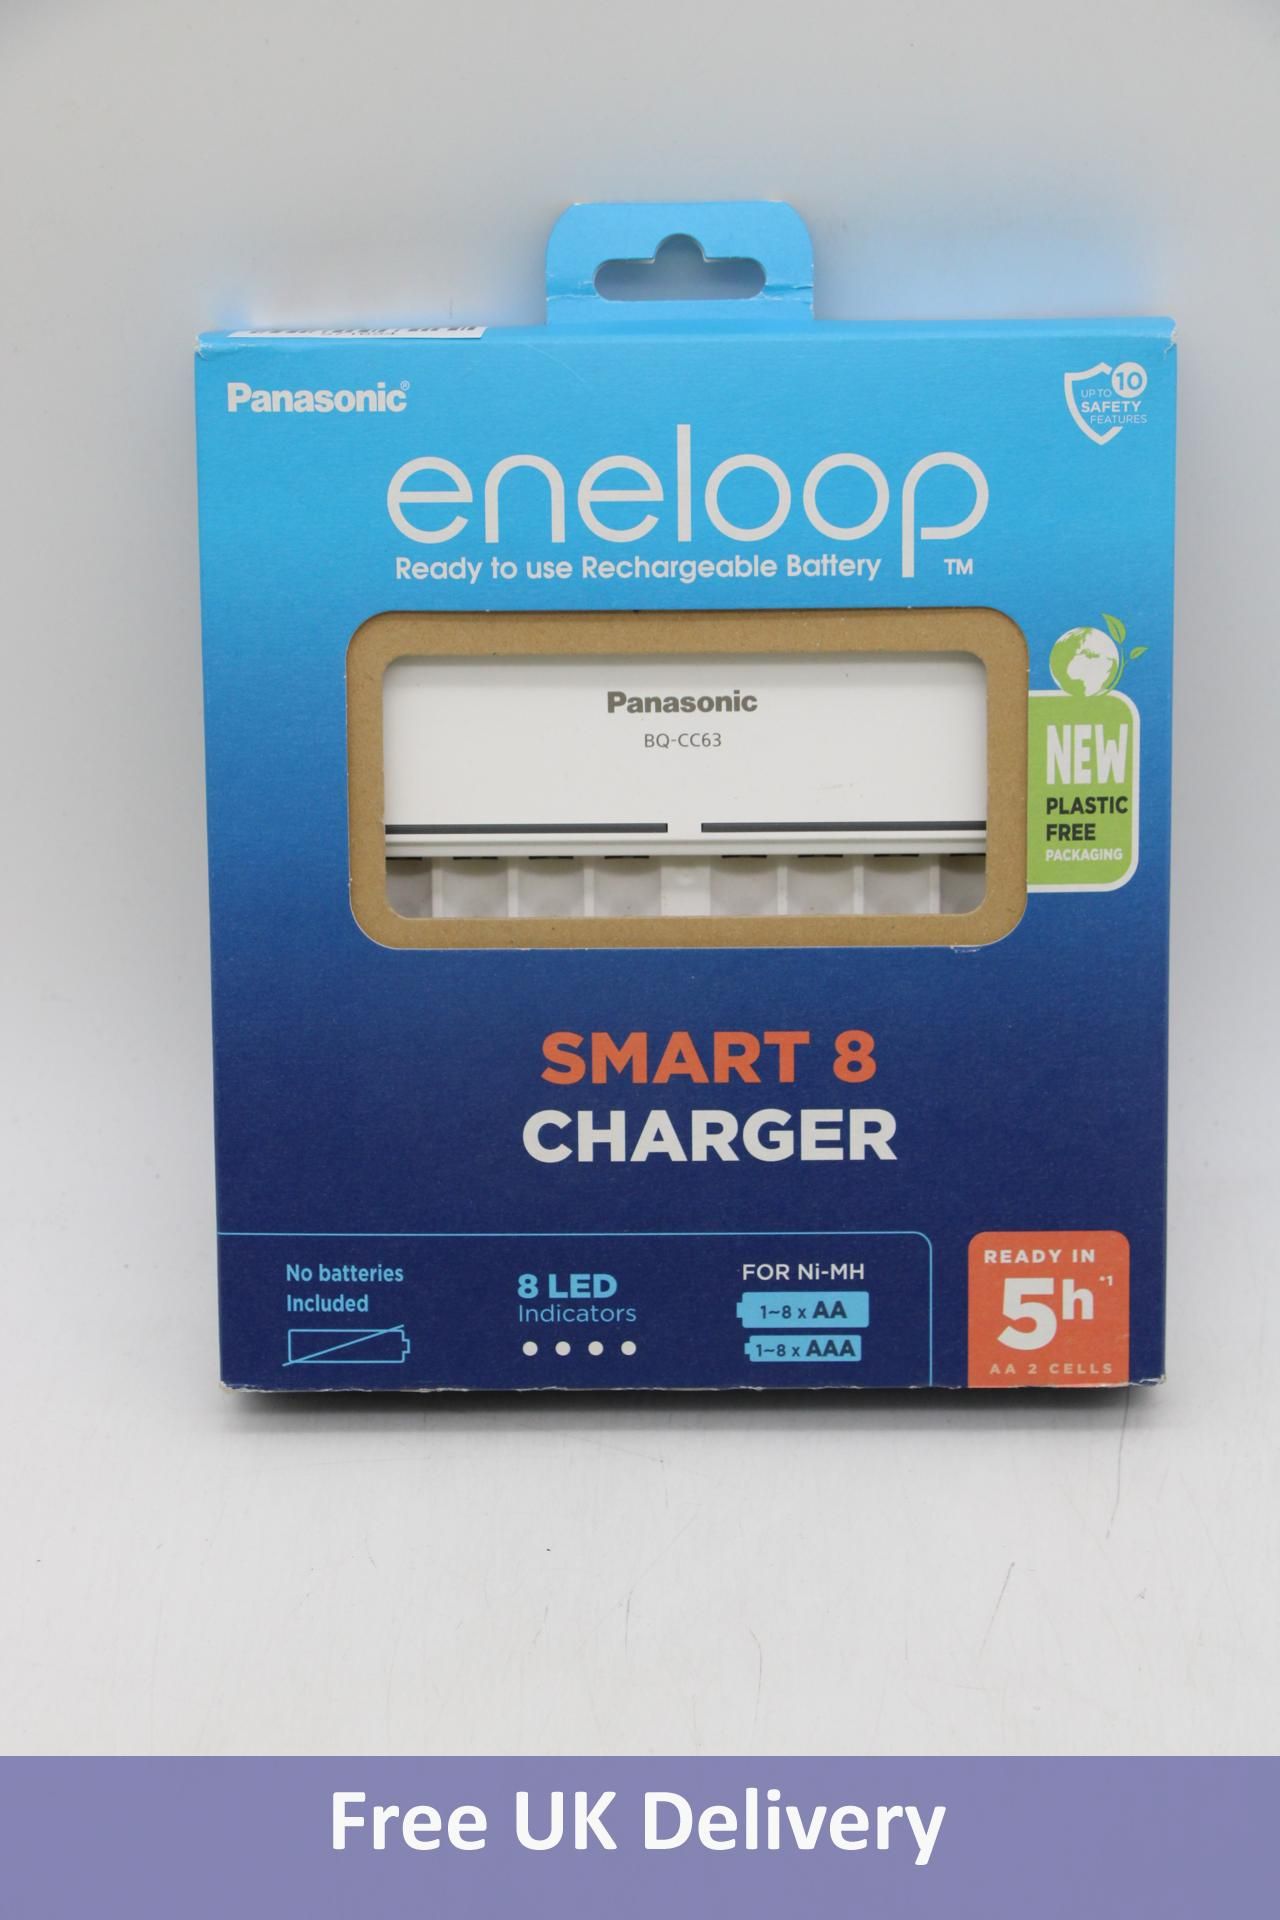 Panasonic Eneloop Rechargeable Battery Smart 8 Charger with 8 LED Indicators